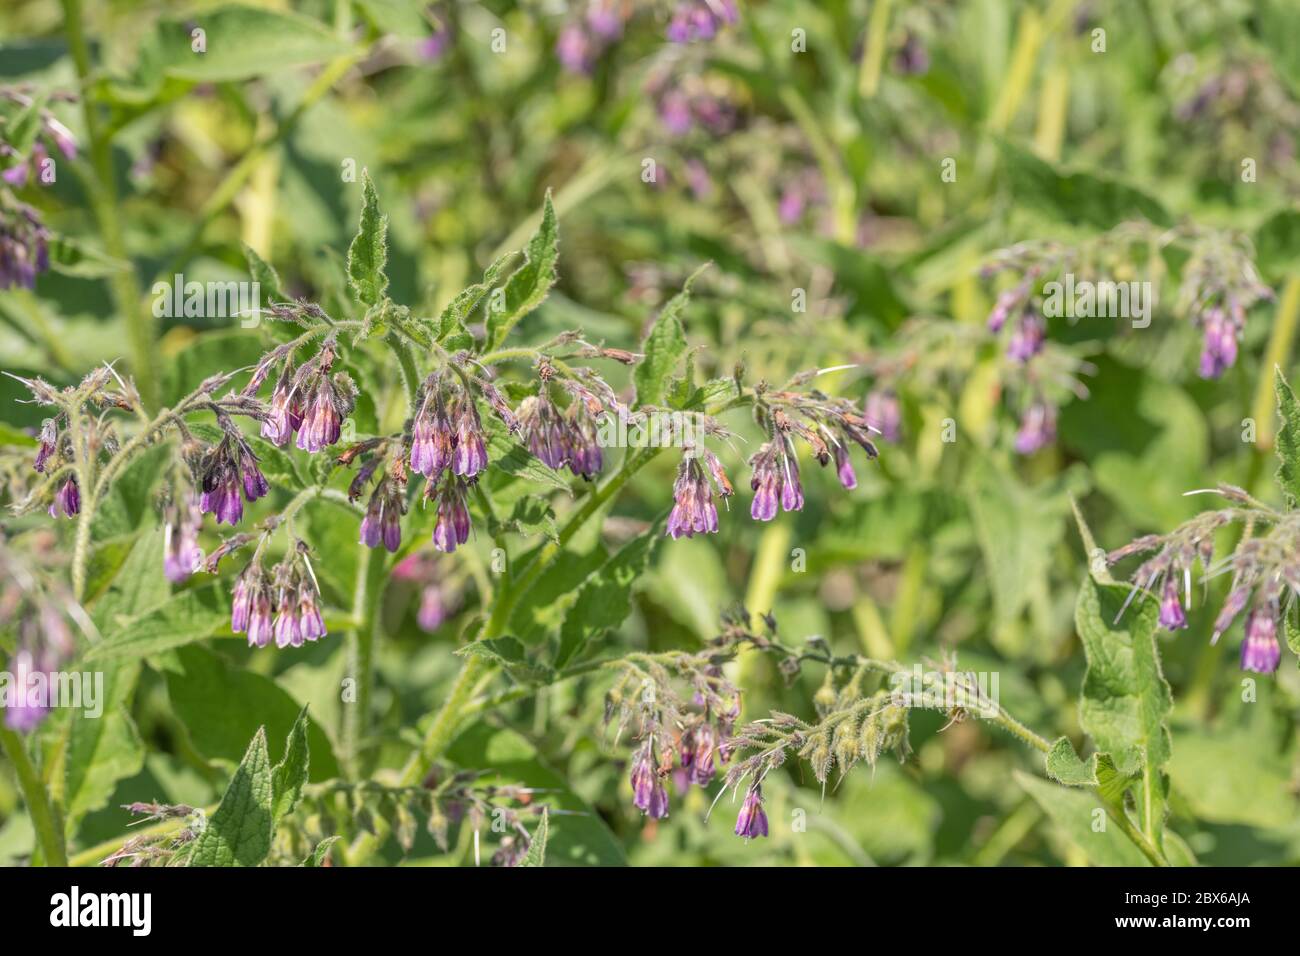 Mass of flowering Comfrey / Symphytum officinale flowers on a sunny summer day. Used as a herbal / medicinal plant and known as Bone-kit. Stock Photo